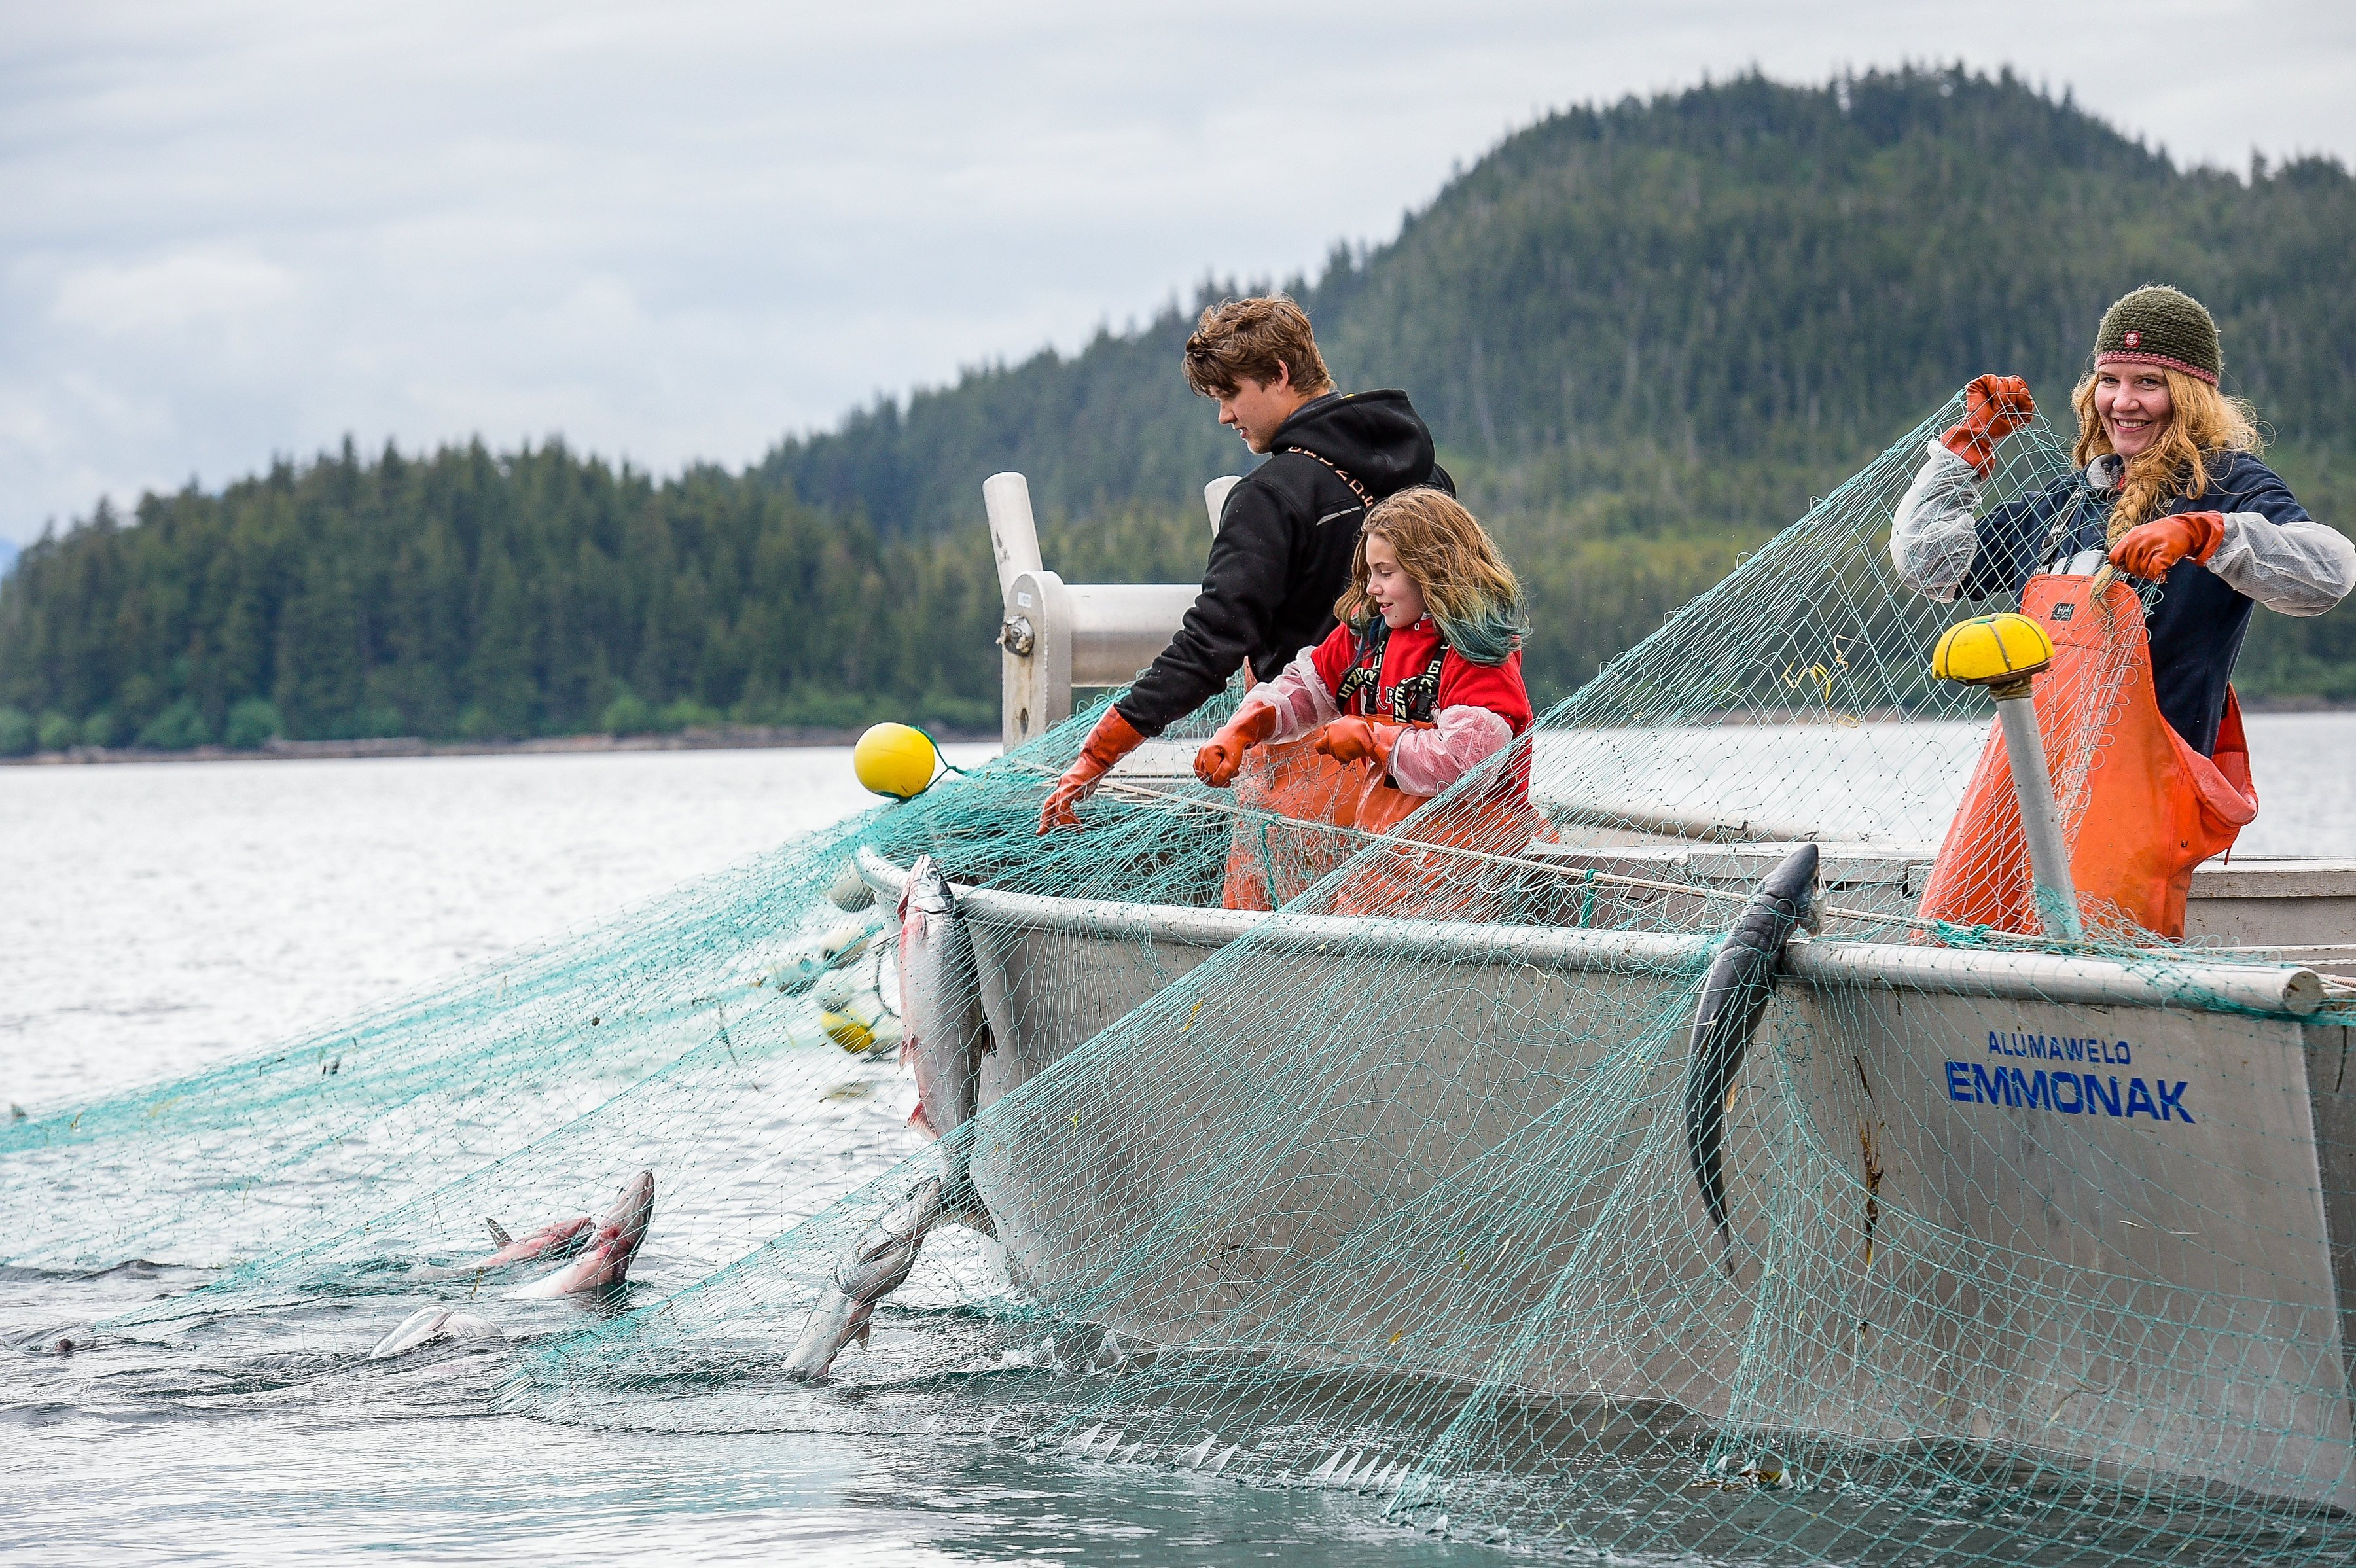 Blythe Thomas and her family harvest fresh sockeye salmon from their set net sight in Prince William Sound.